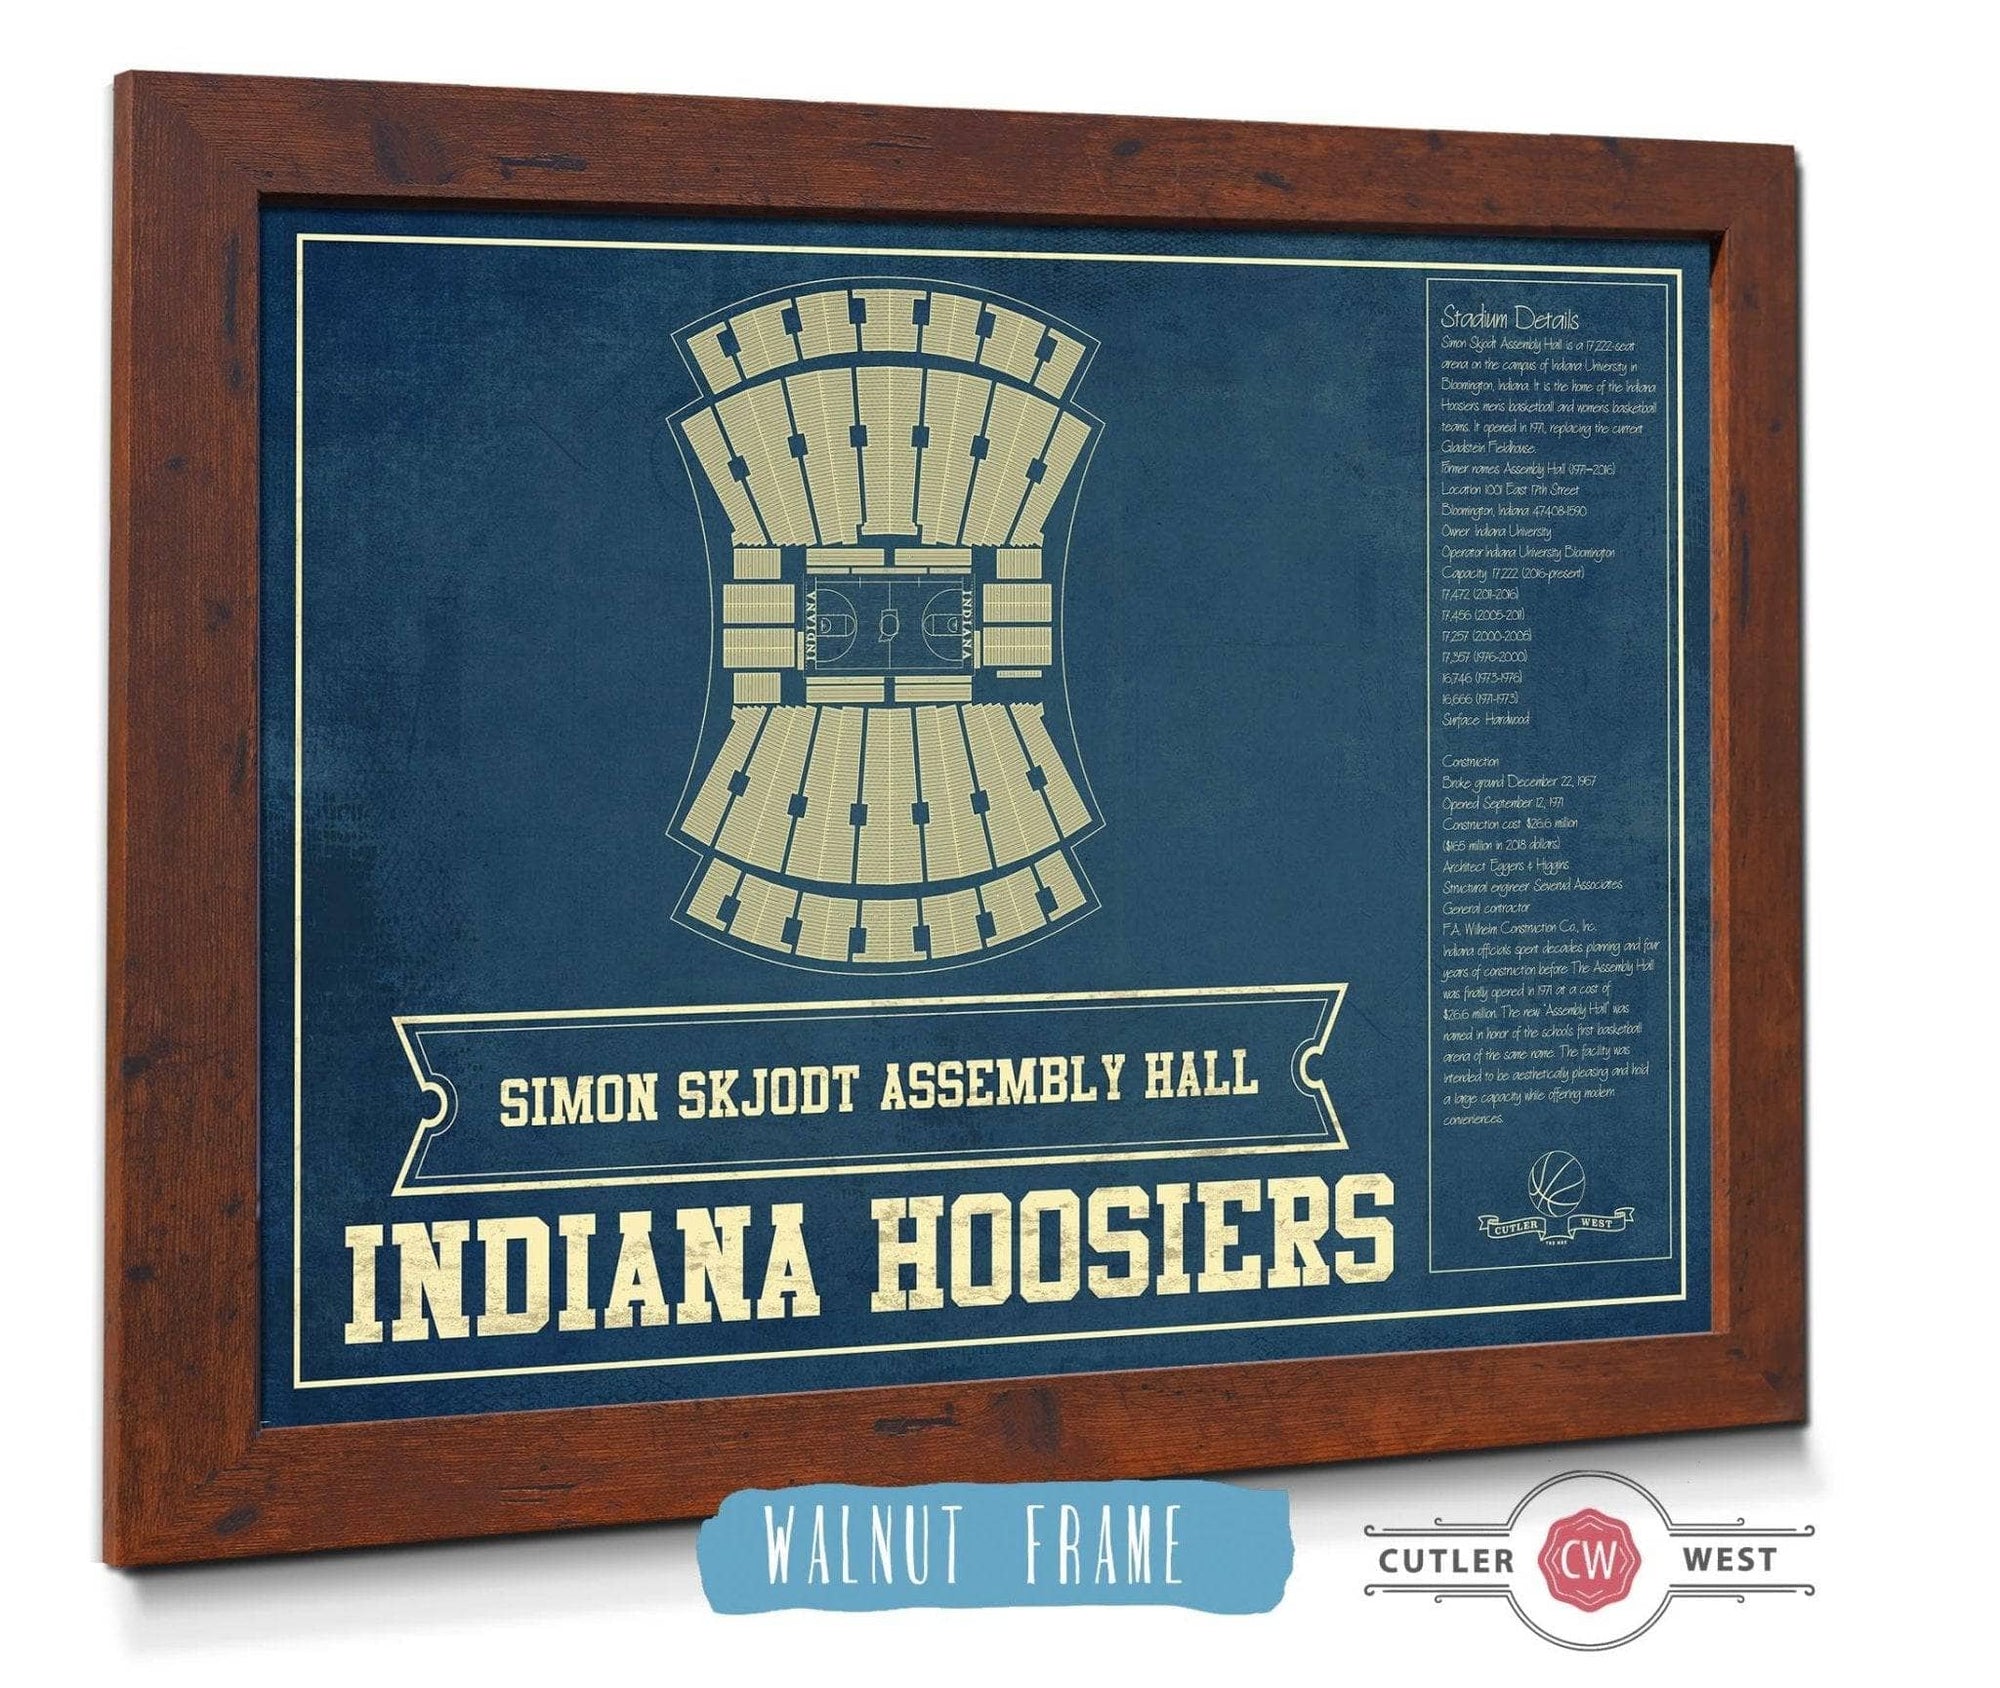 Cutler West Basketball Collection 14" x 11" / Walnut Frame Simon Skjodt Assembly Hall Indiana Hoosiers NCAA Vintage Print 933350231_83297